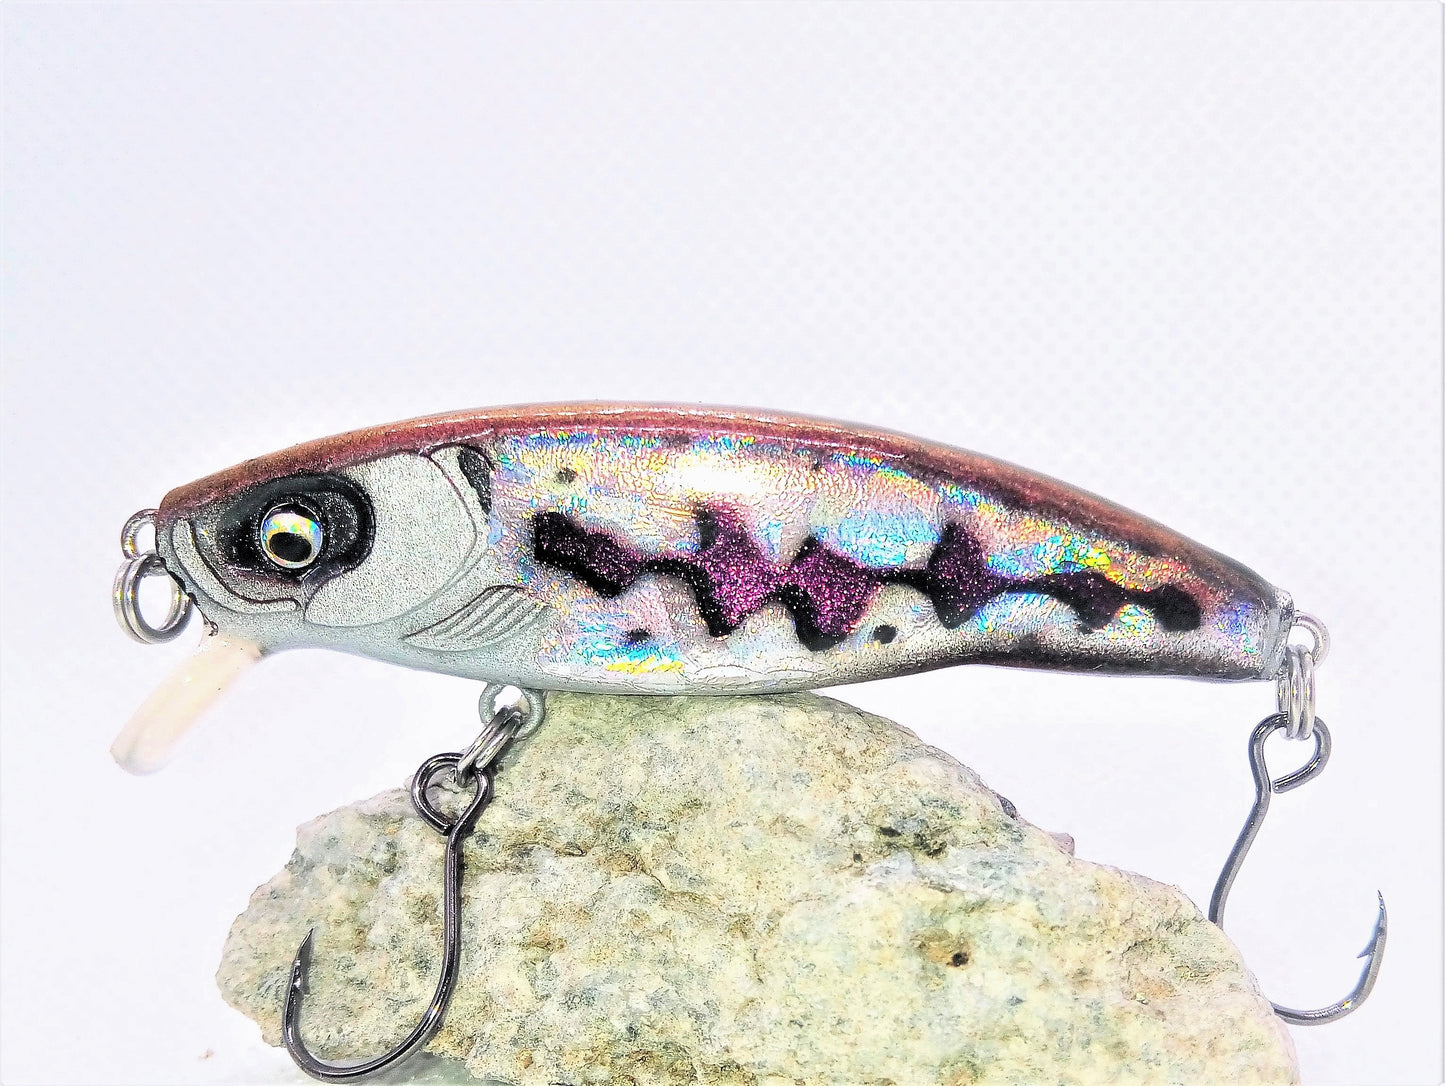 Minnow Holographic Sleeper - end of series